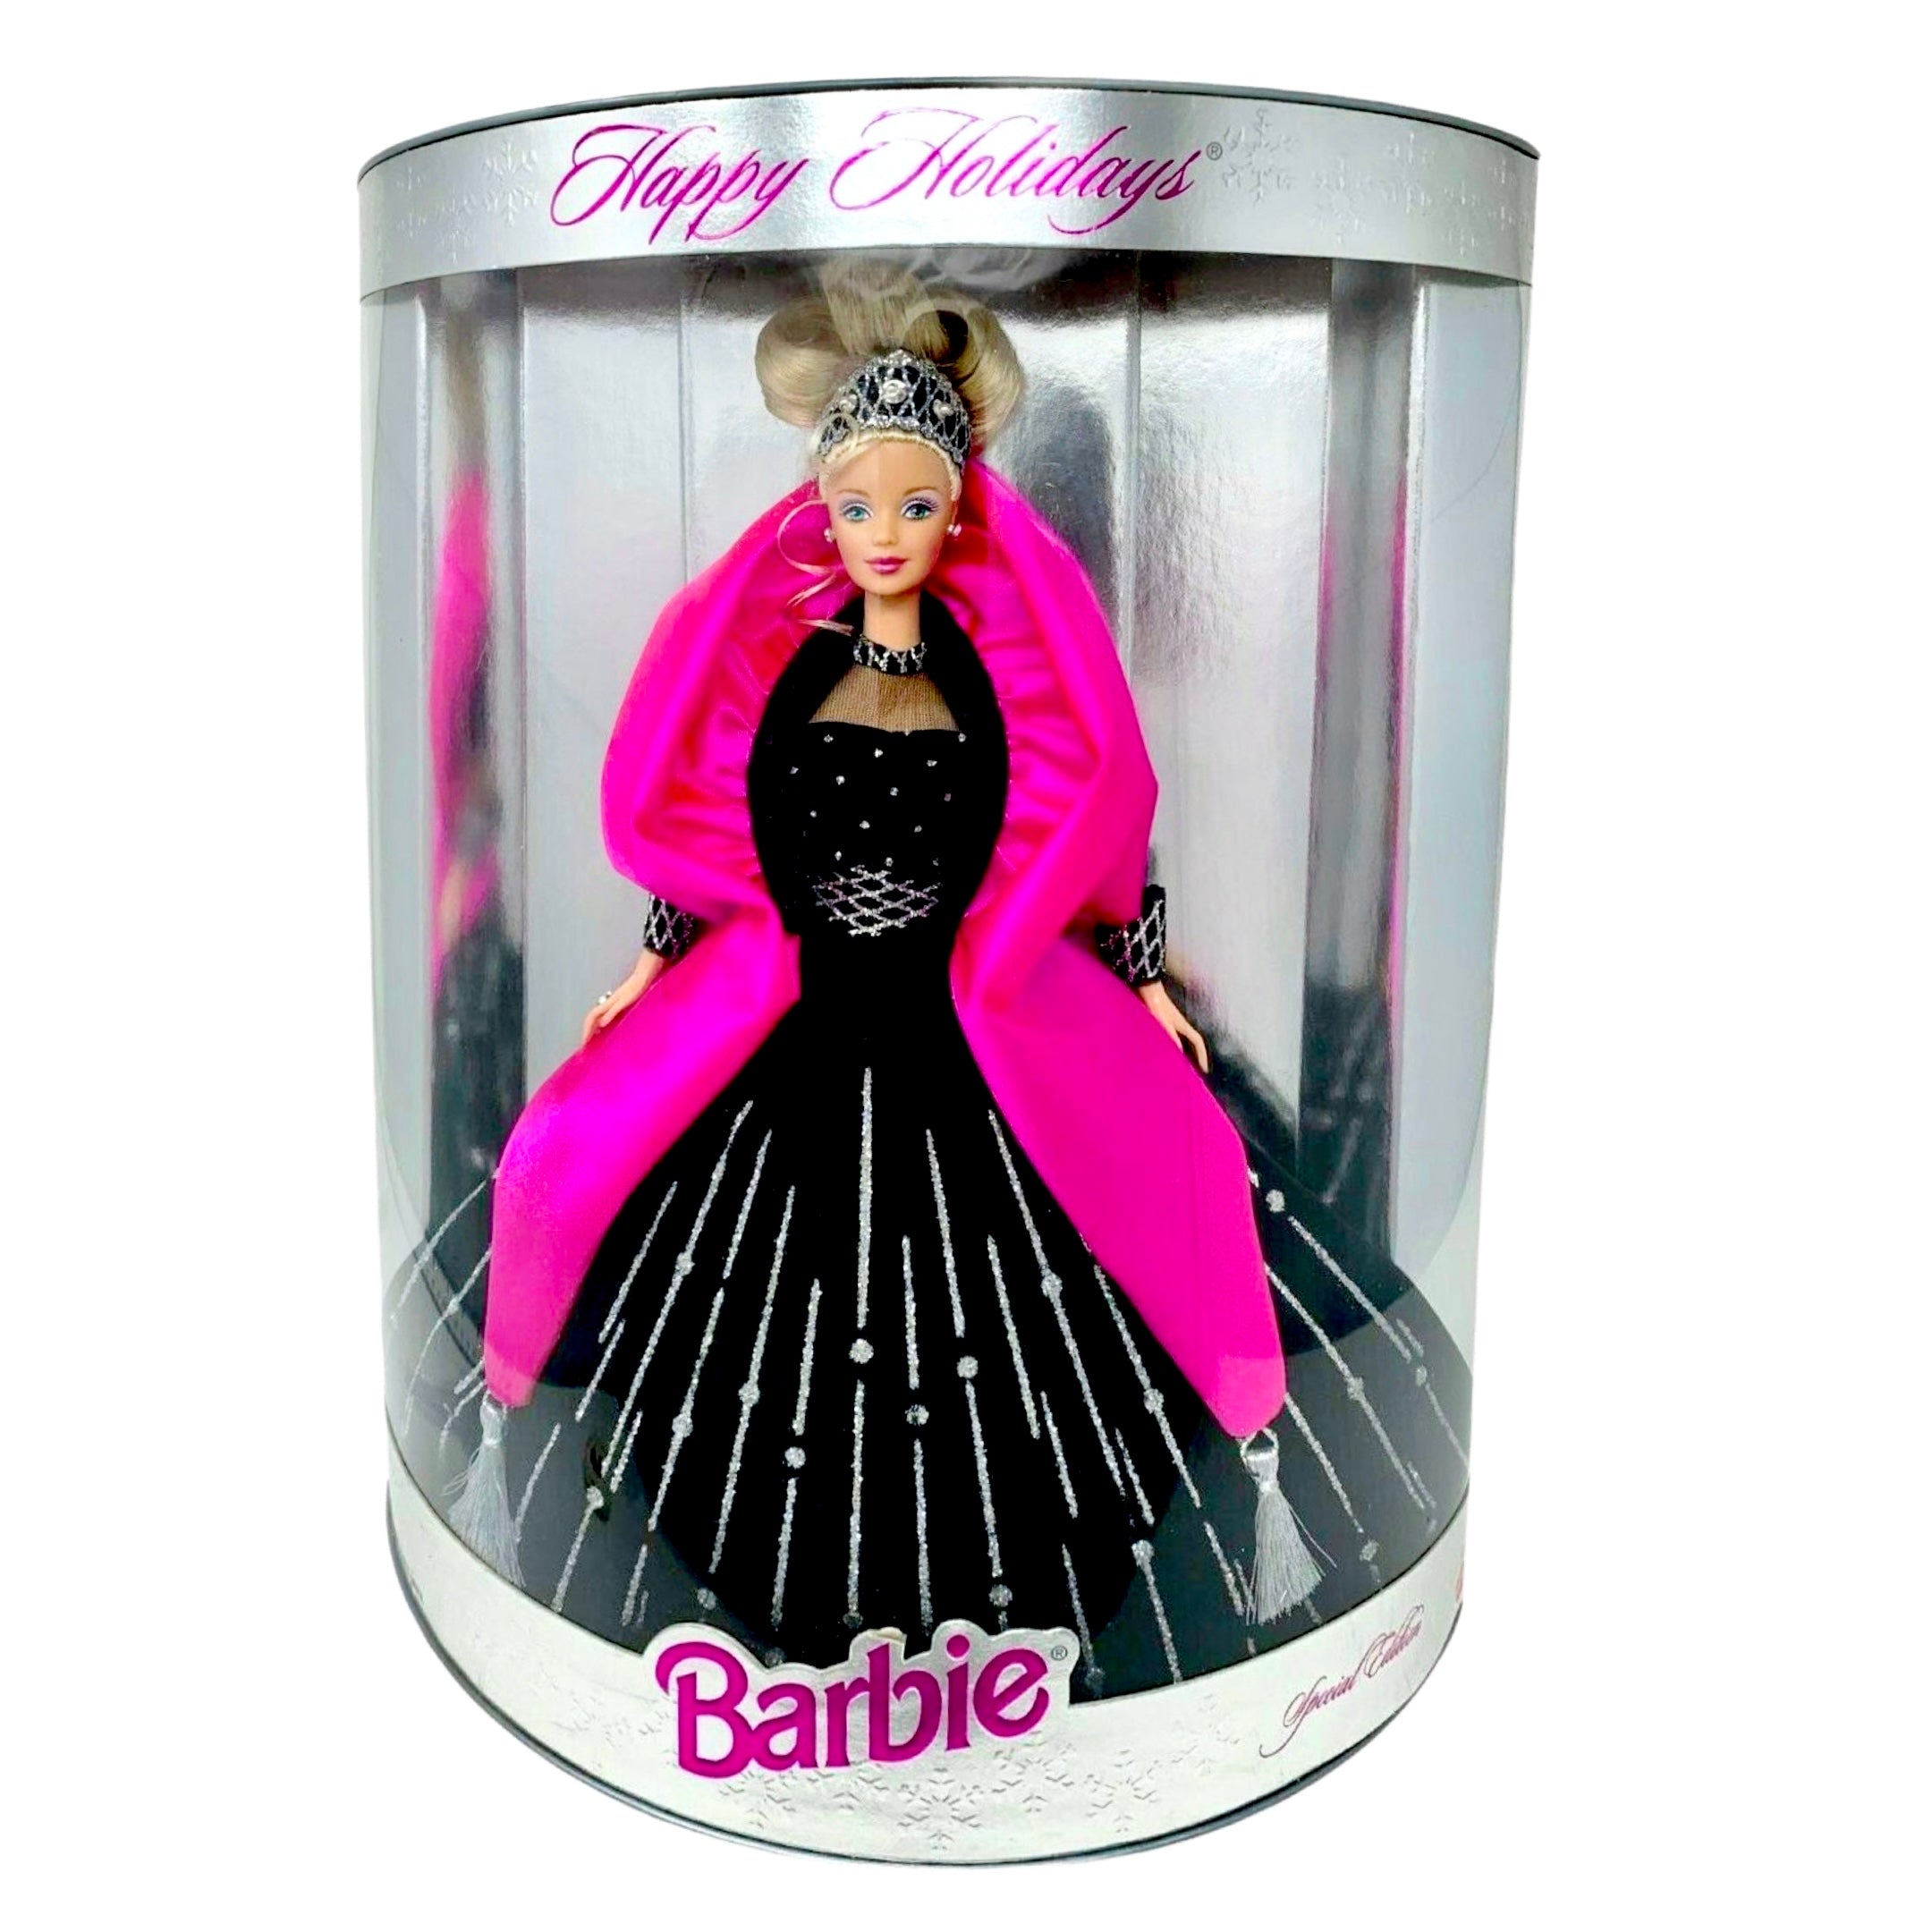 Happy Holidays Special Edition Barbie #20200 | 1998 Mattel